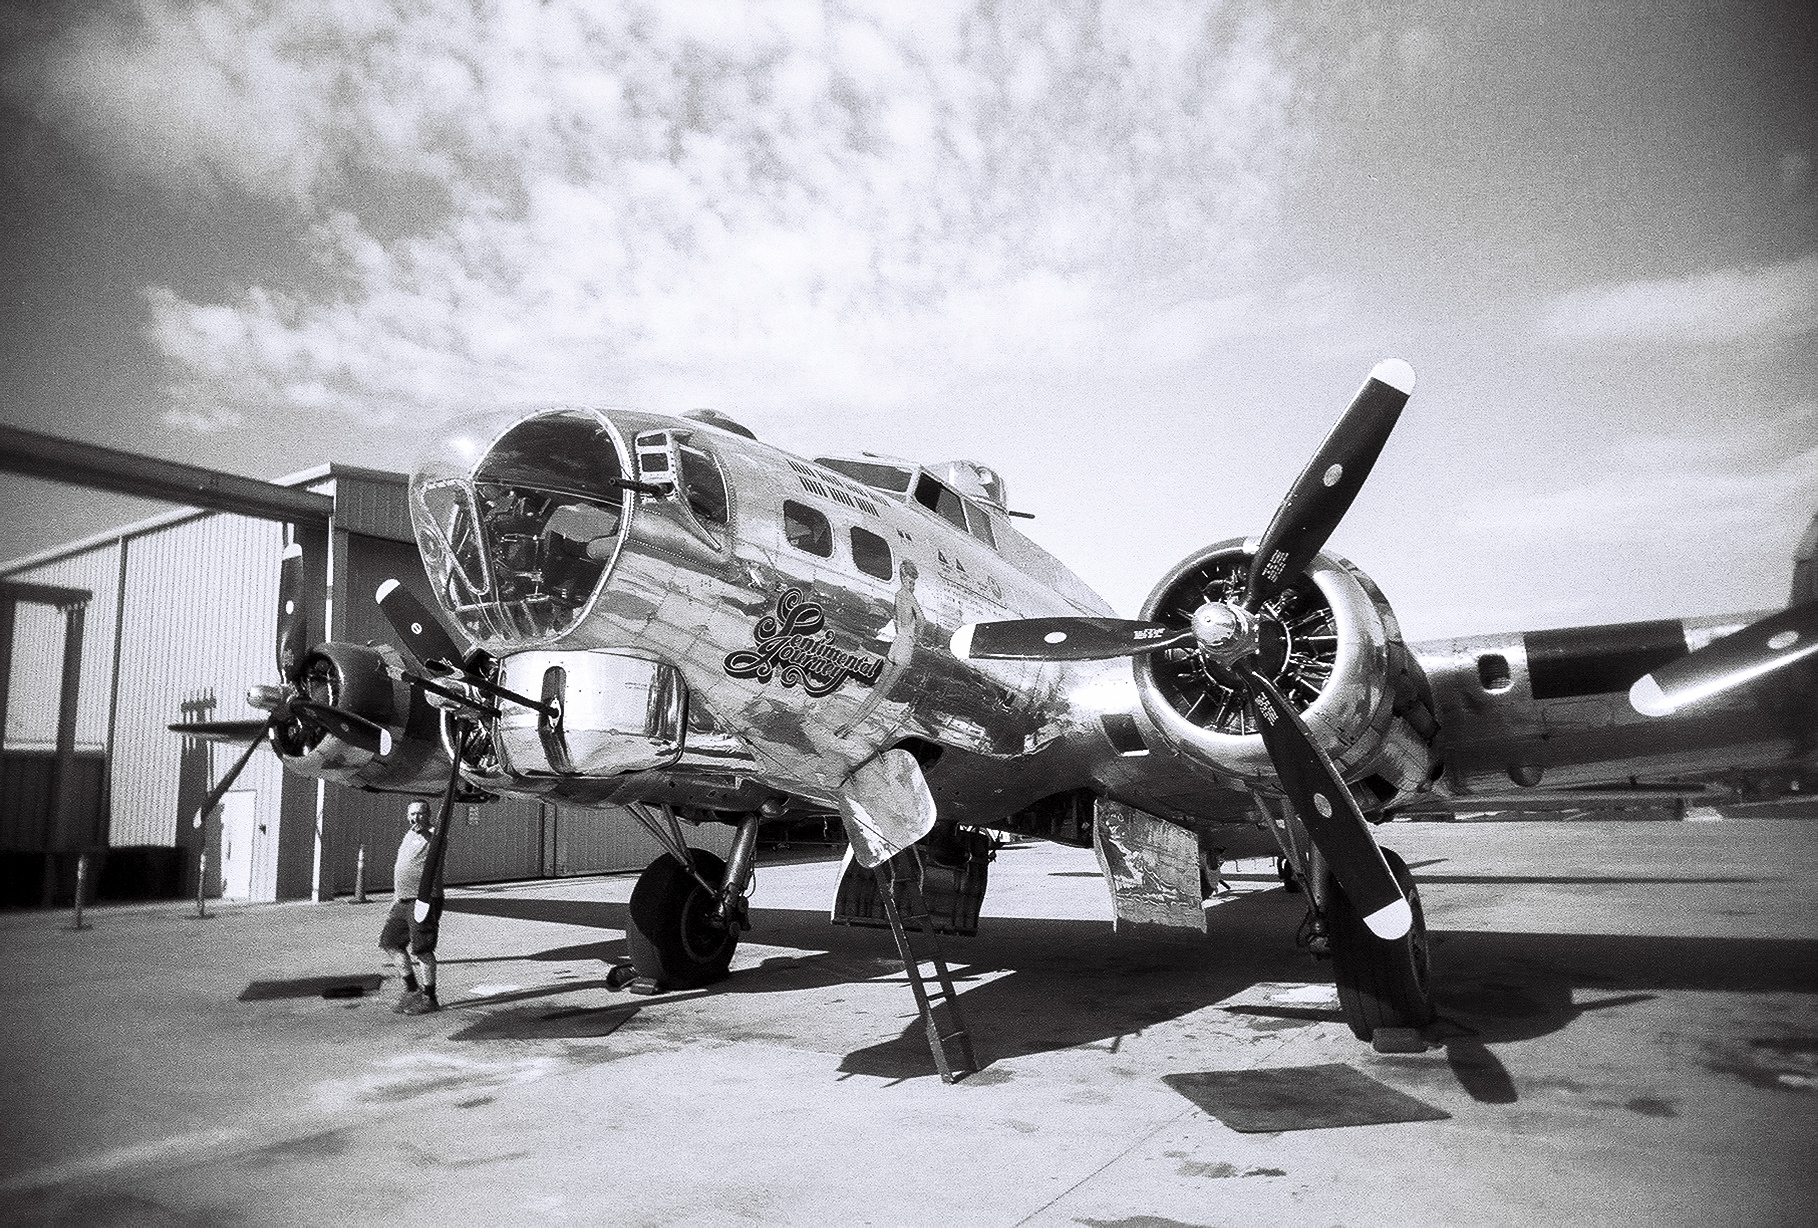 Arizona Commemorative Air Force Museum by Kevin Dooley via Flickr/CC BY-SA 2.0